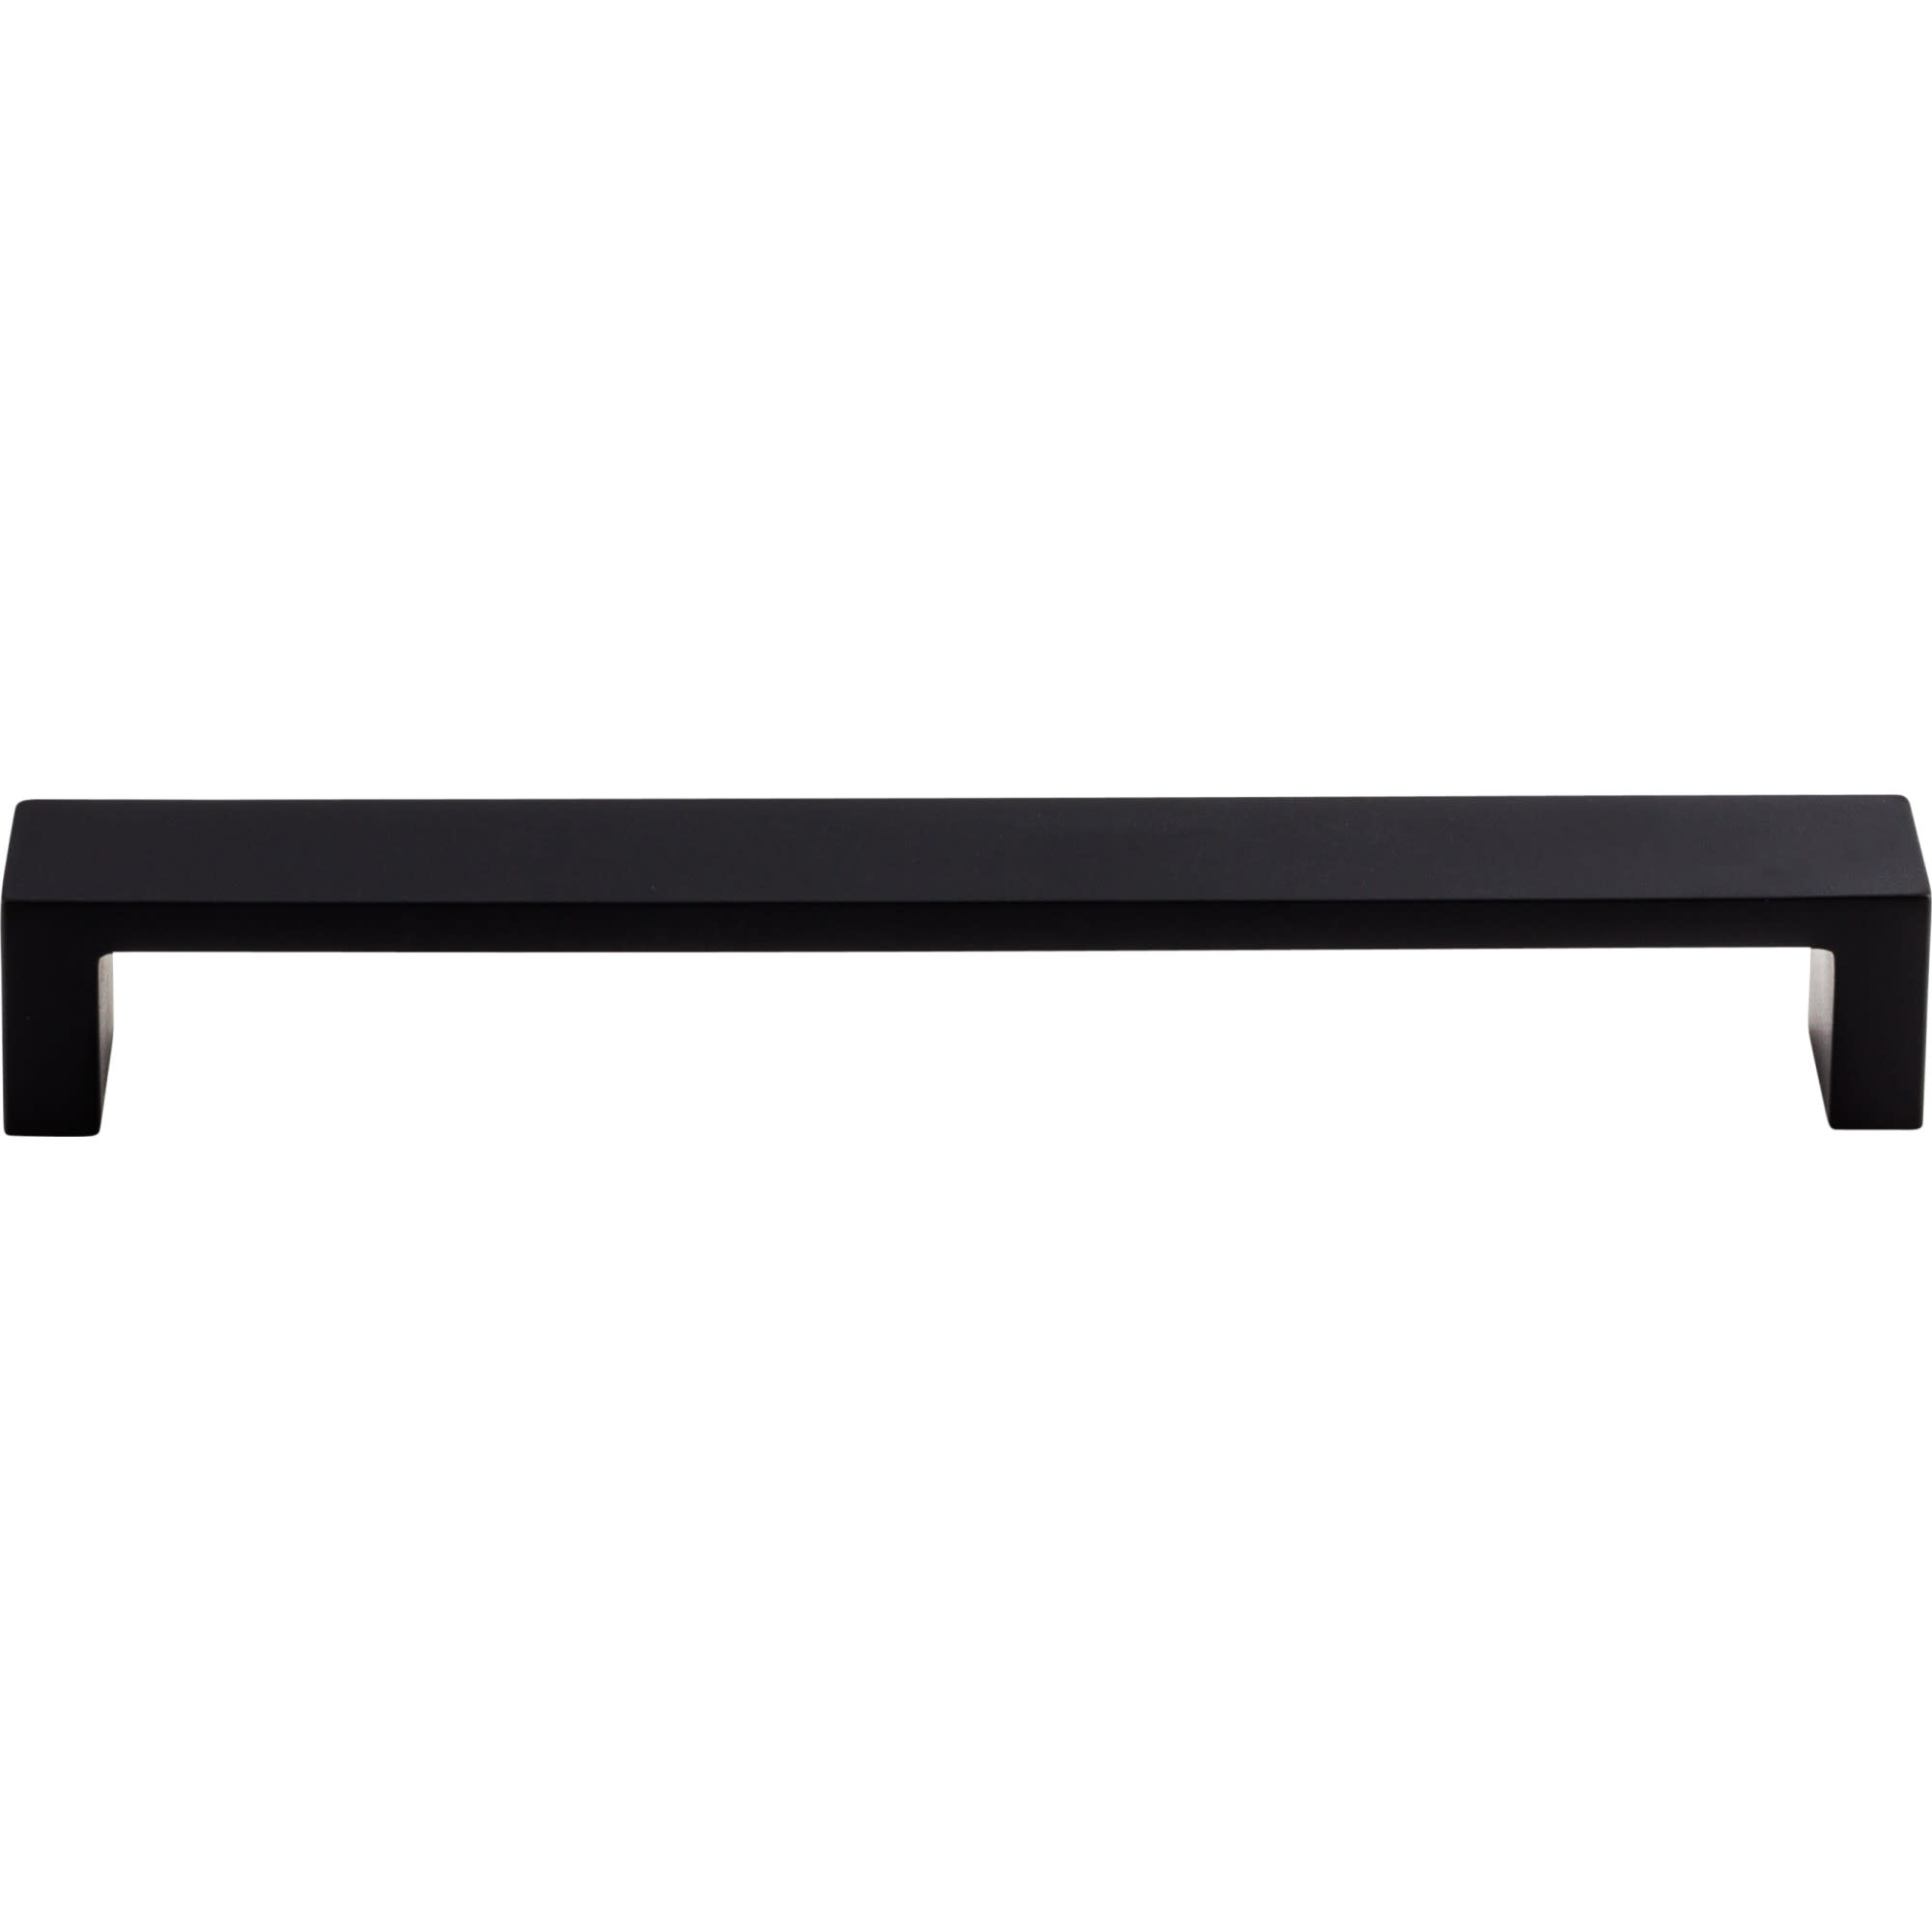 Top Knobs Tk252 Sanctuary Ii 7" Center To Center Handle Cabinet Pull - Black - image 1 of 7